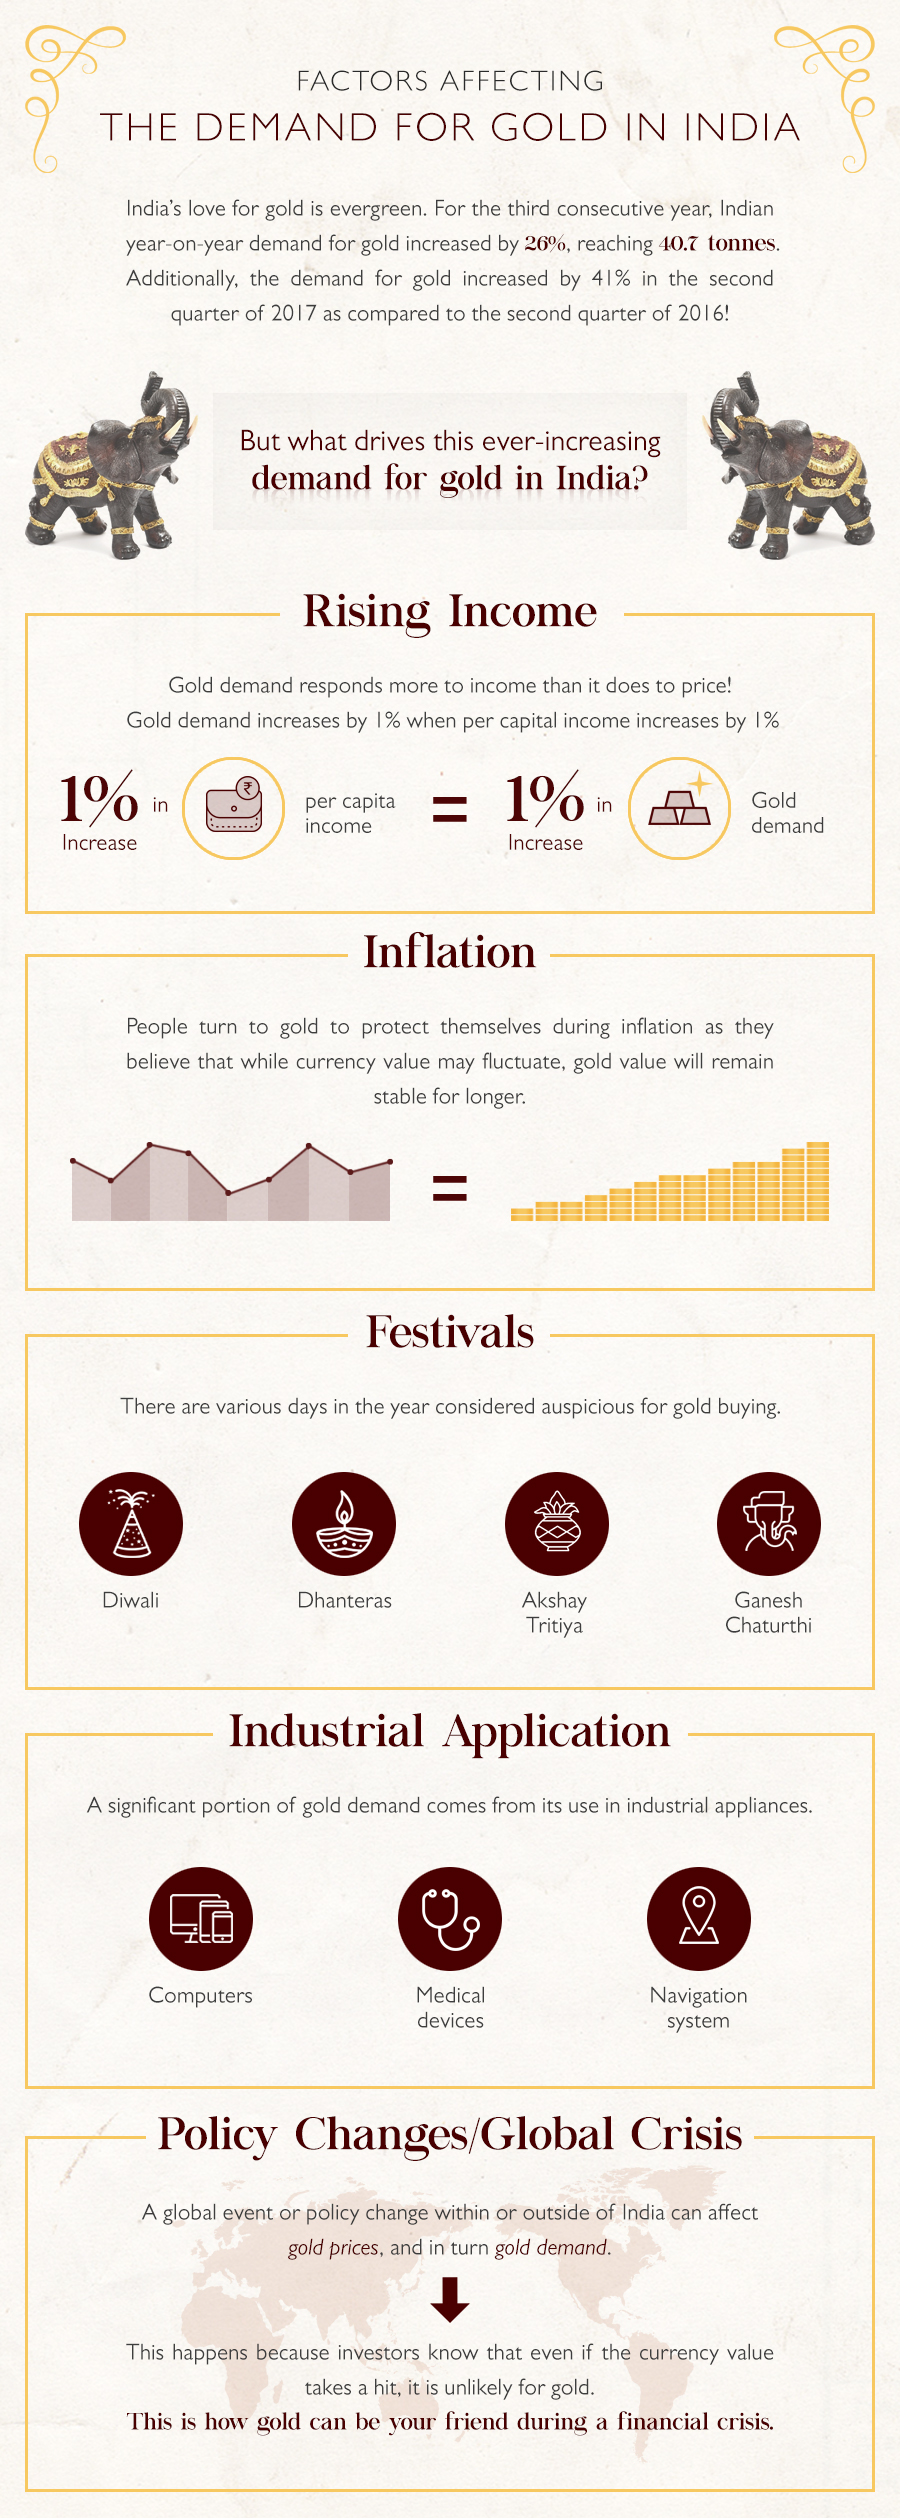 Love for gold among Indians is evergreen, which reflects its ever increasing demand of gold in Indian market. Take a look at various factors which affect the demand of gold in India.